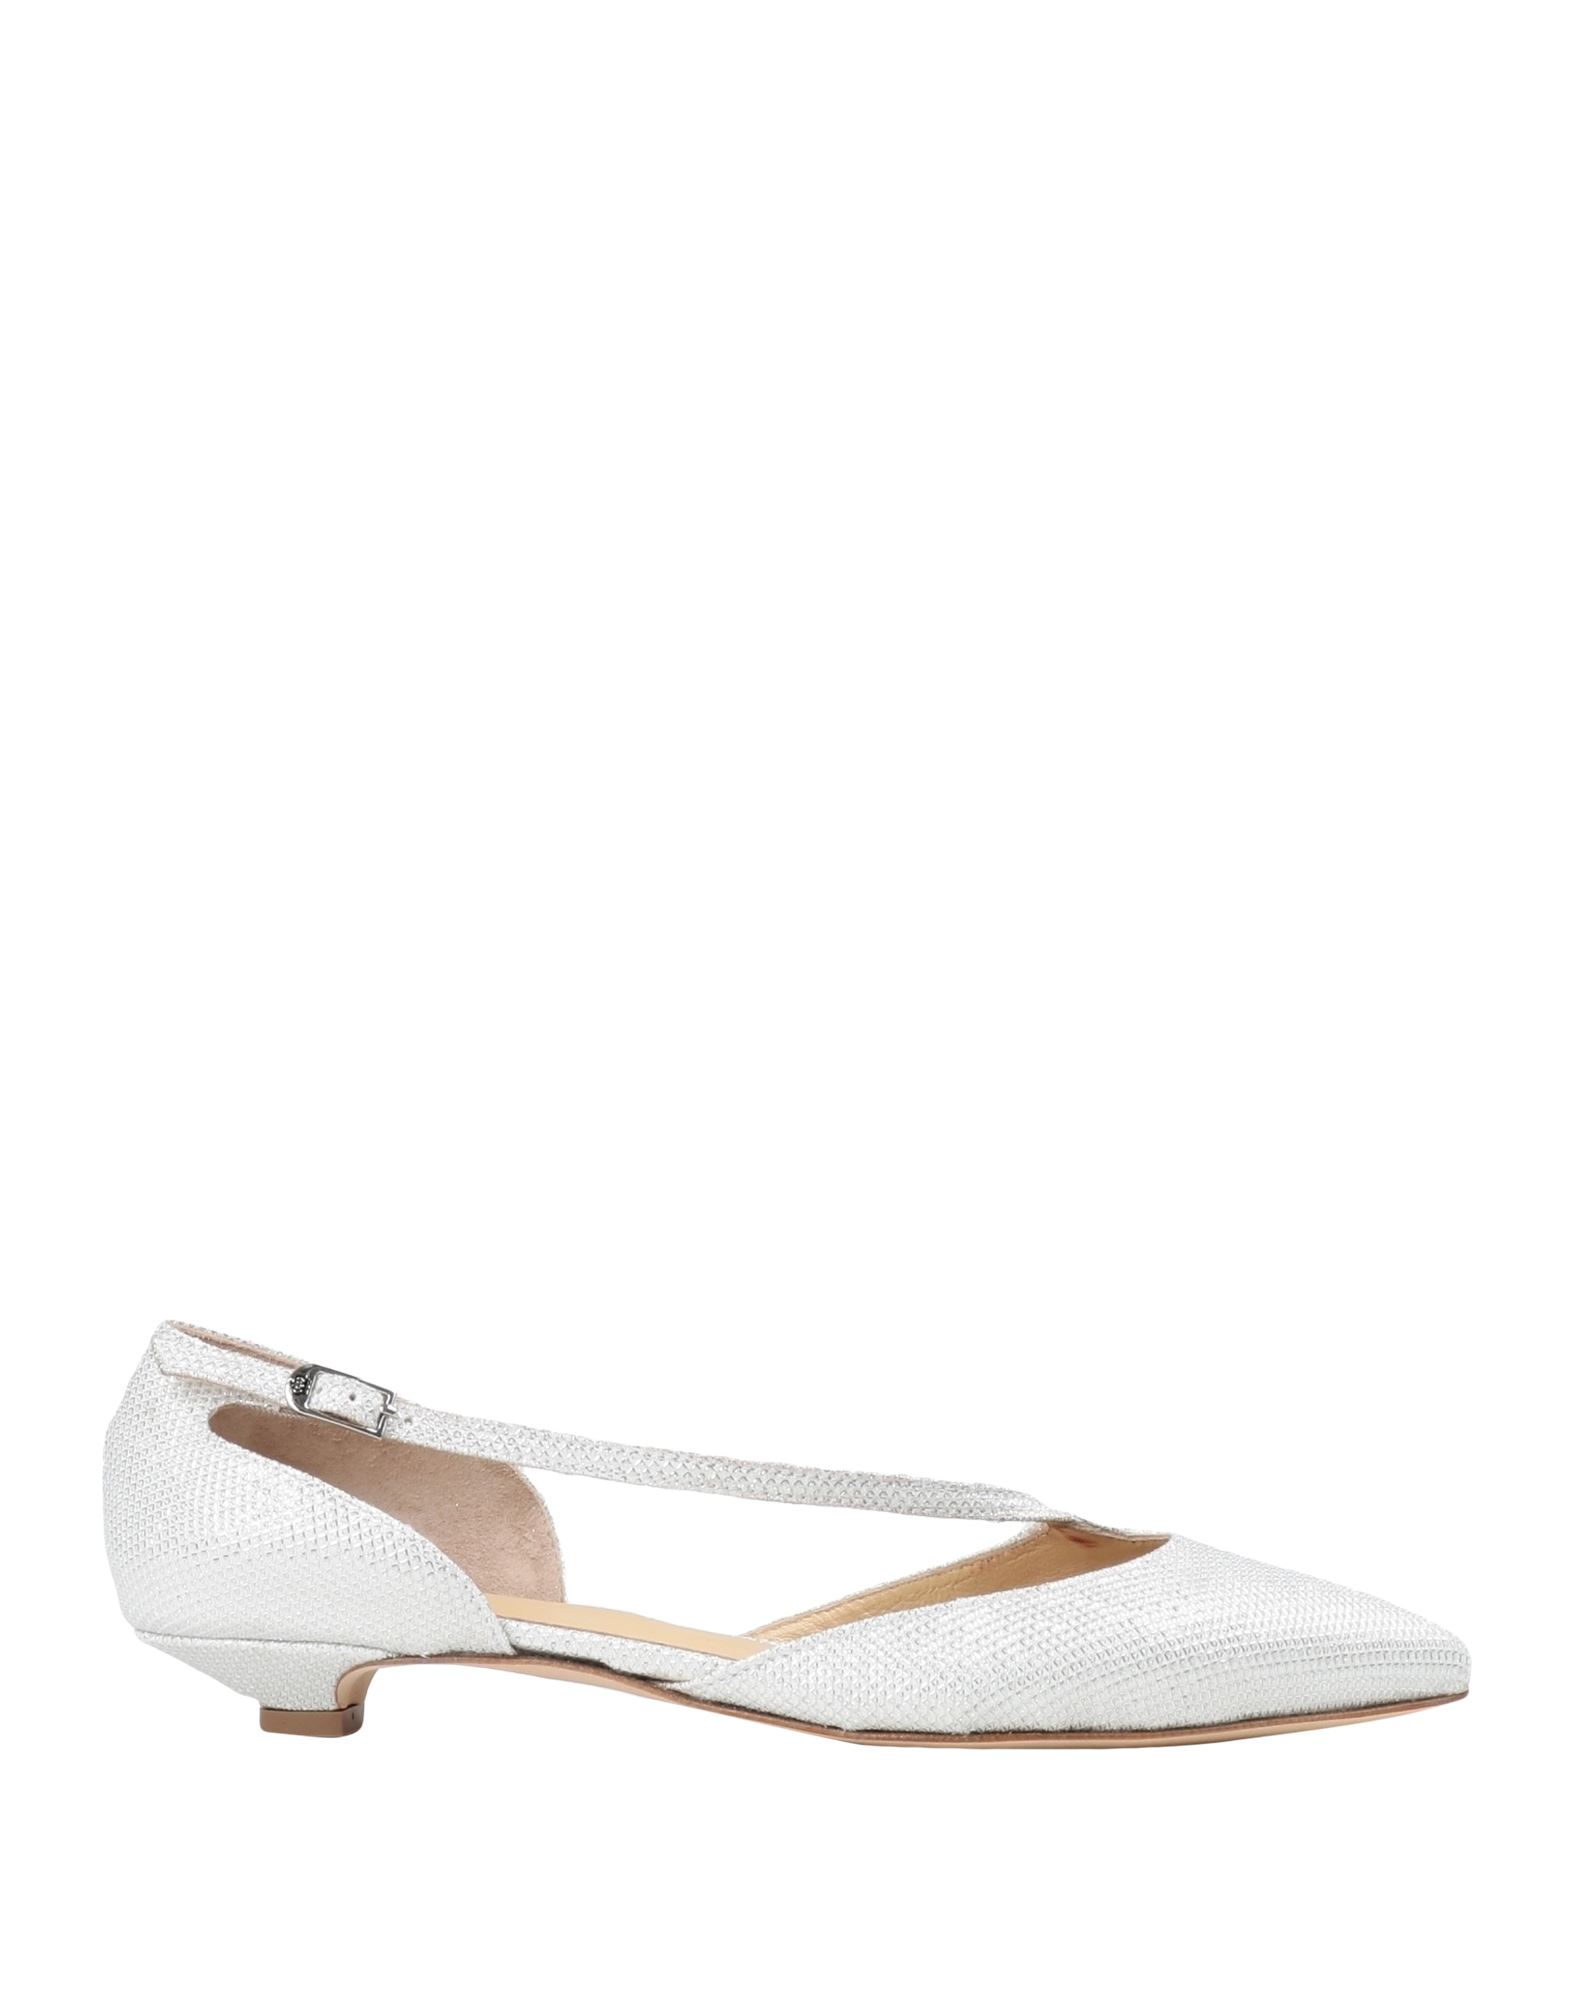 L'arianna Woman Ballet Flats White Size 8 Synthetic Fibers, Soft Leather